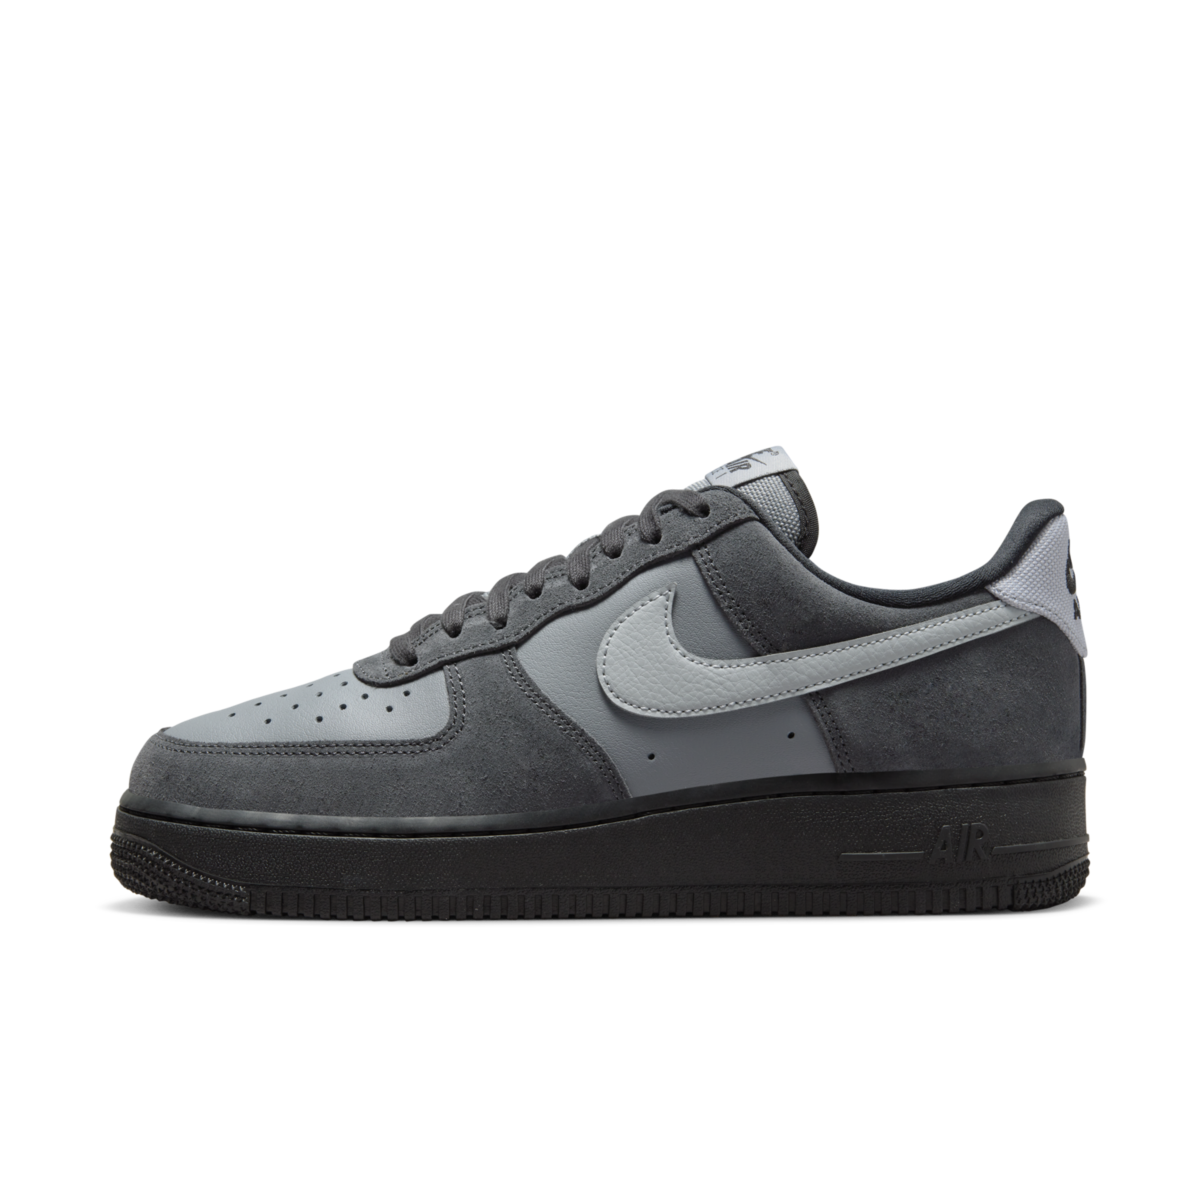 Nike Air Force 1 'Anthracite' | CW7584-001 | The Drop Date